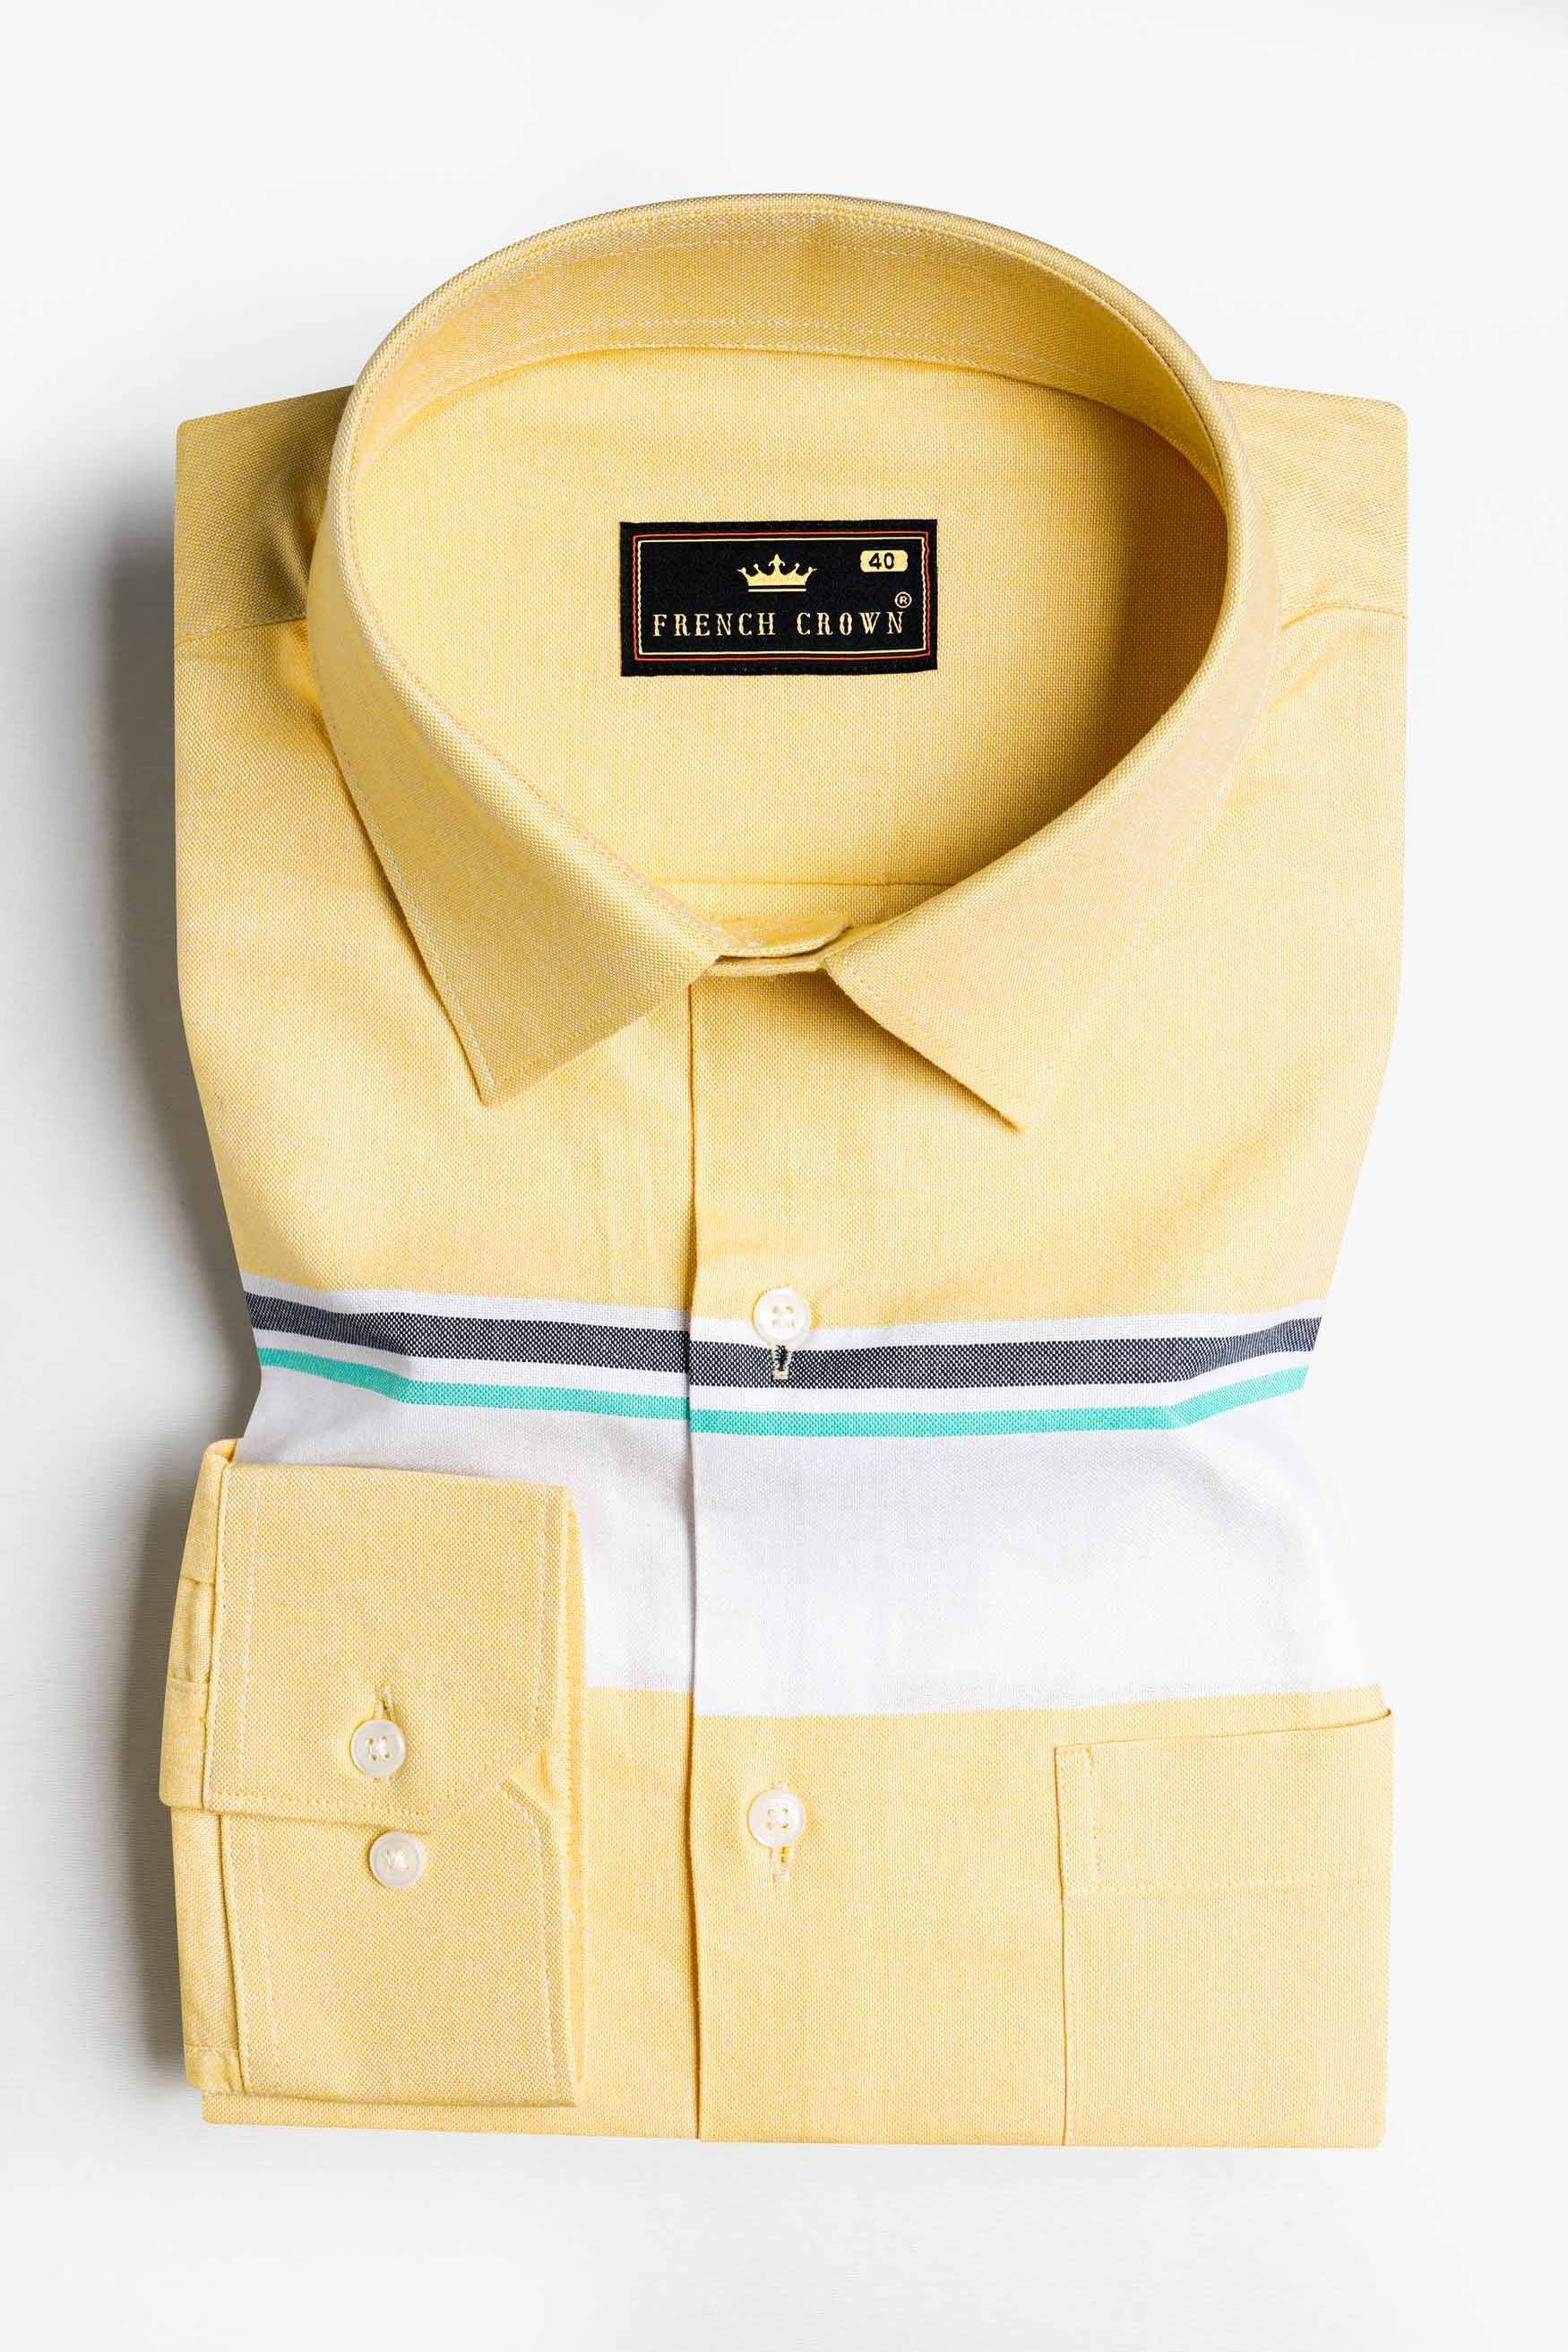 Flax Yellow with Bright White Royal Oxford Shirt